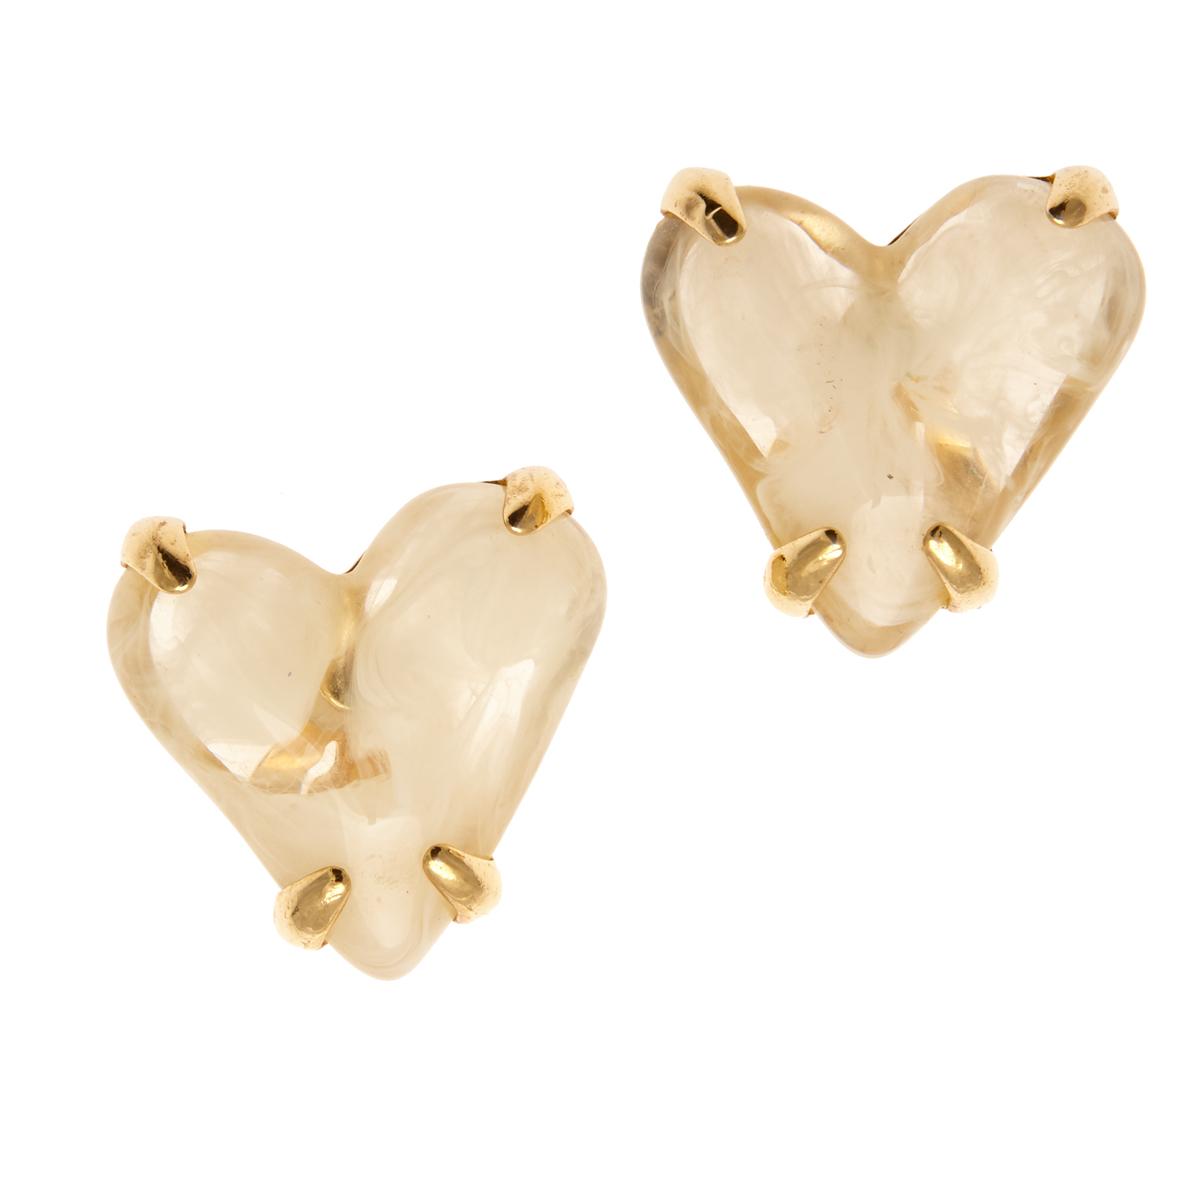 Pair of Vintage Givenchy Clip On Heart Earrings | eBay